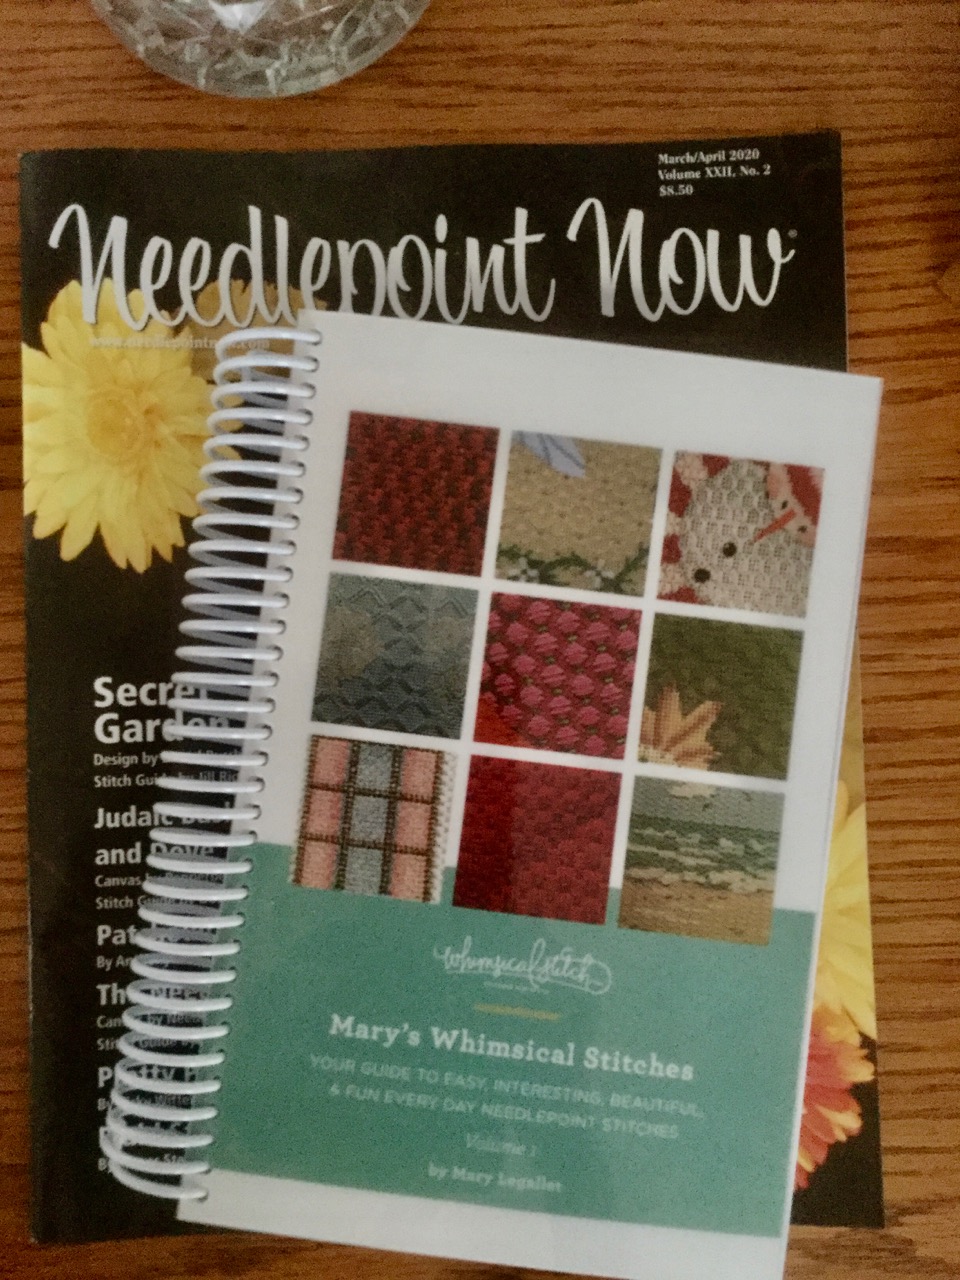 Mary's Whimsical Stitches Bundle, Needlepoint Canvases & Threads